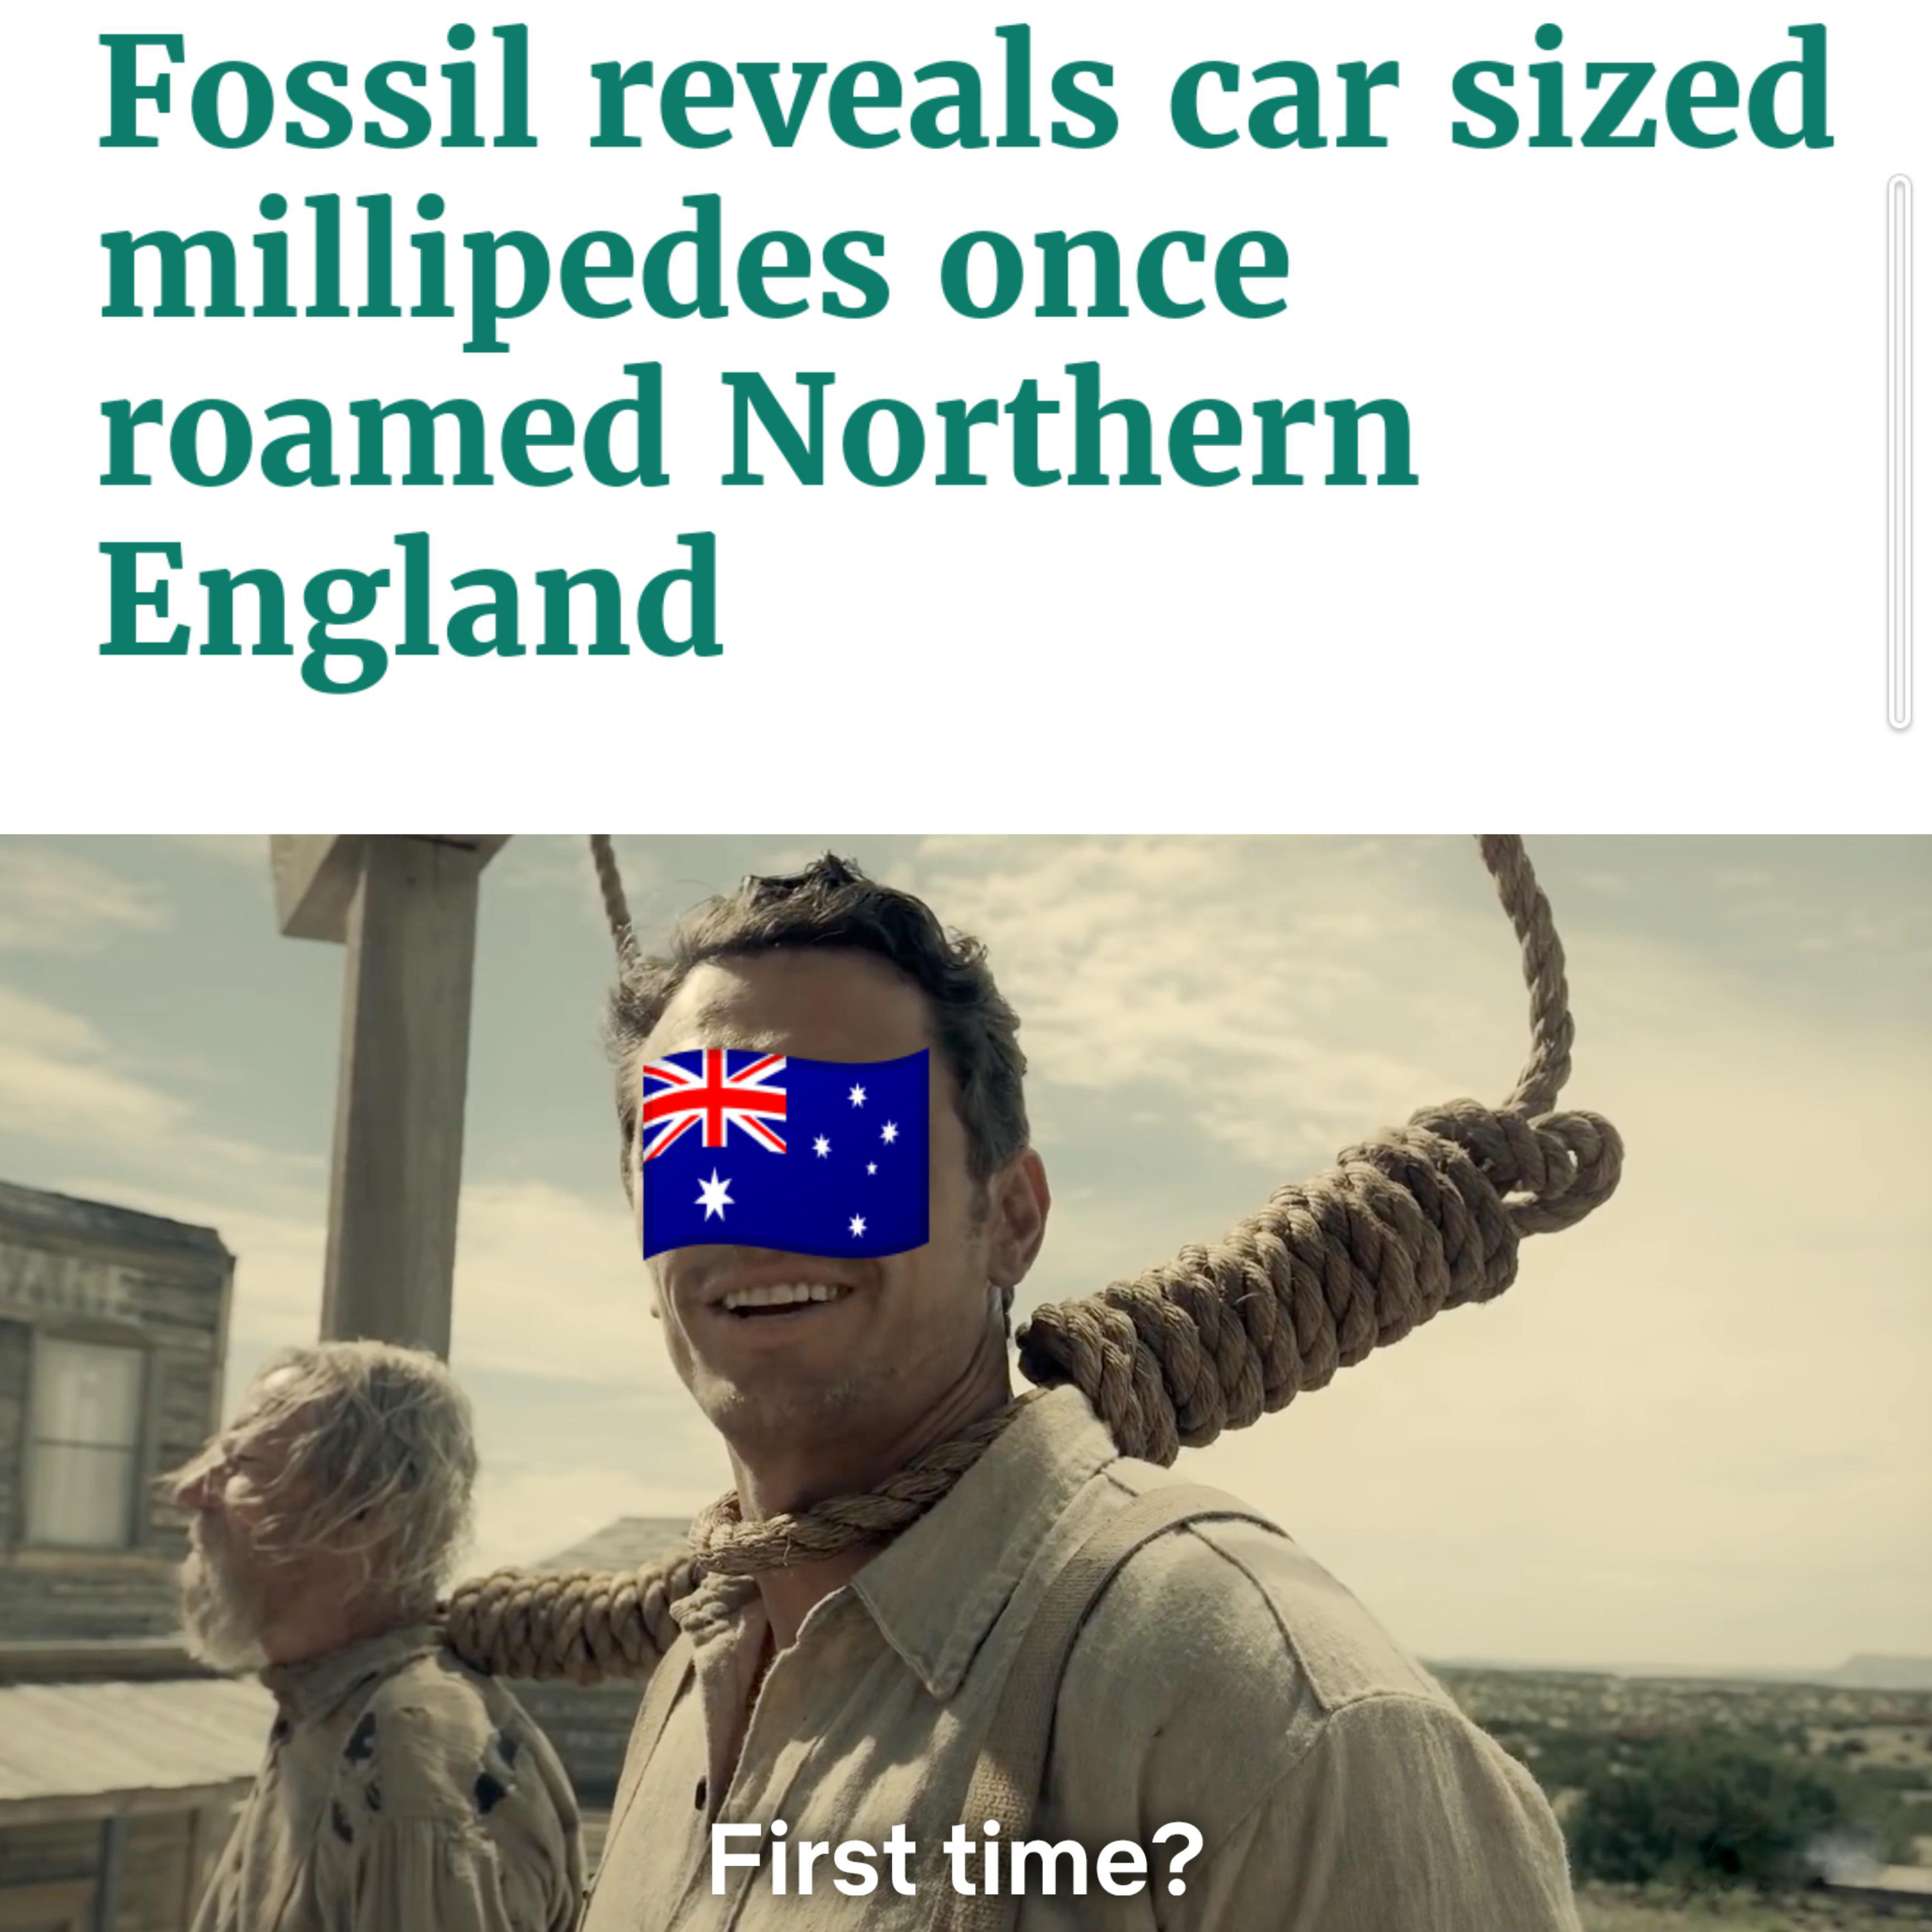 funny memes - dank memes -jost a tiny lil spidah mate - Fossil reveals car sized millipedes once roamed Northern England Nk First time?